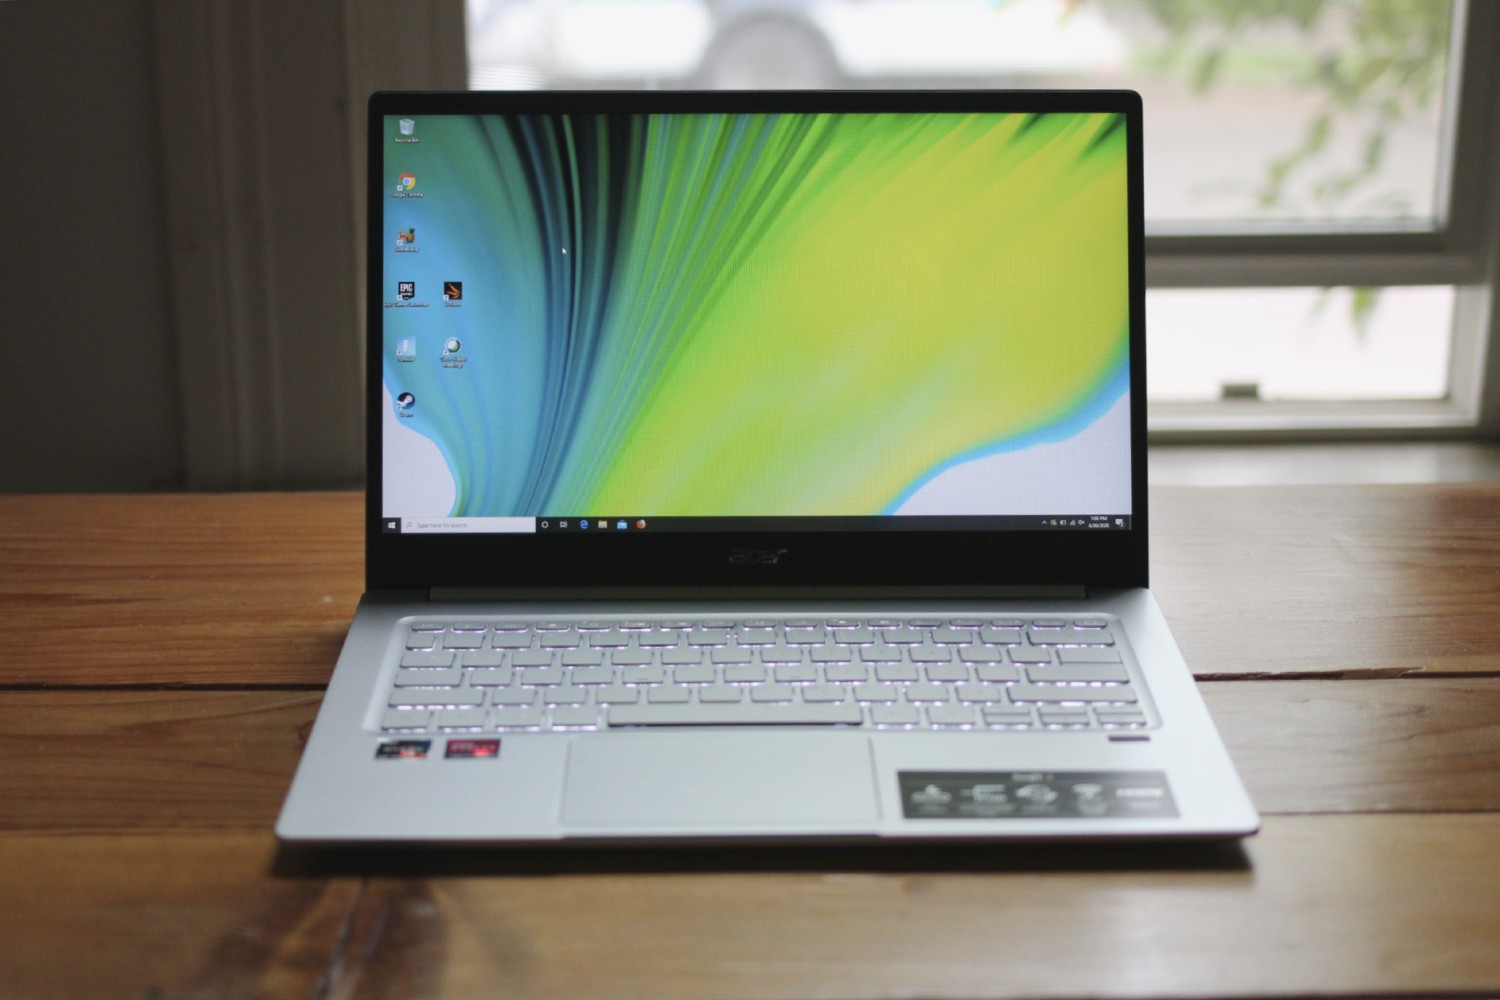 Acer Swift 3 Review 2020 - Pros, Cons and Pricing